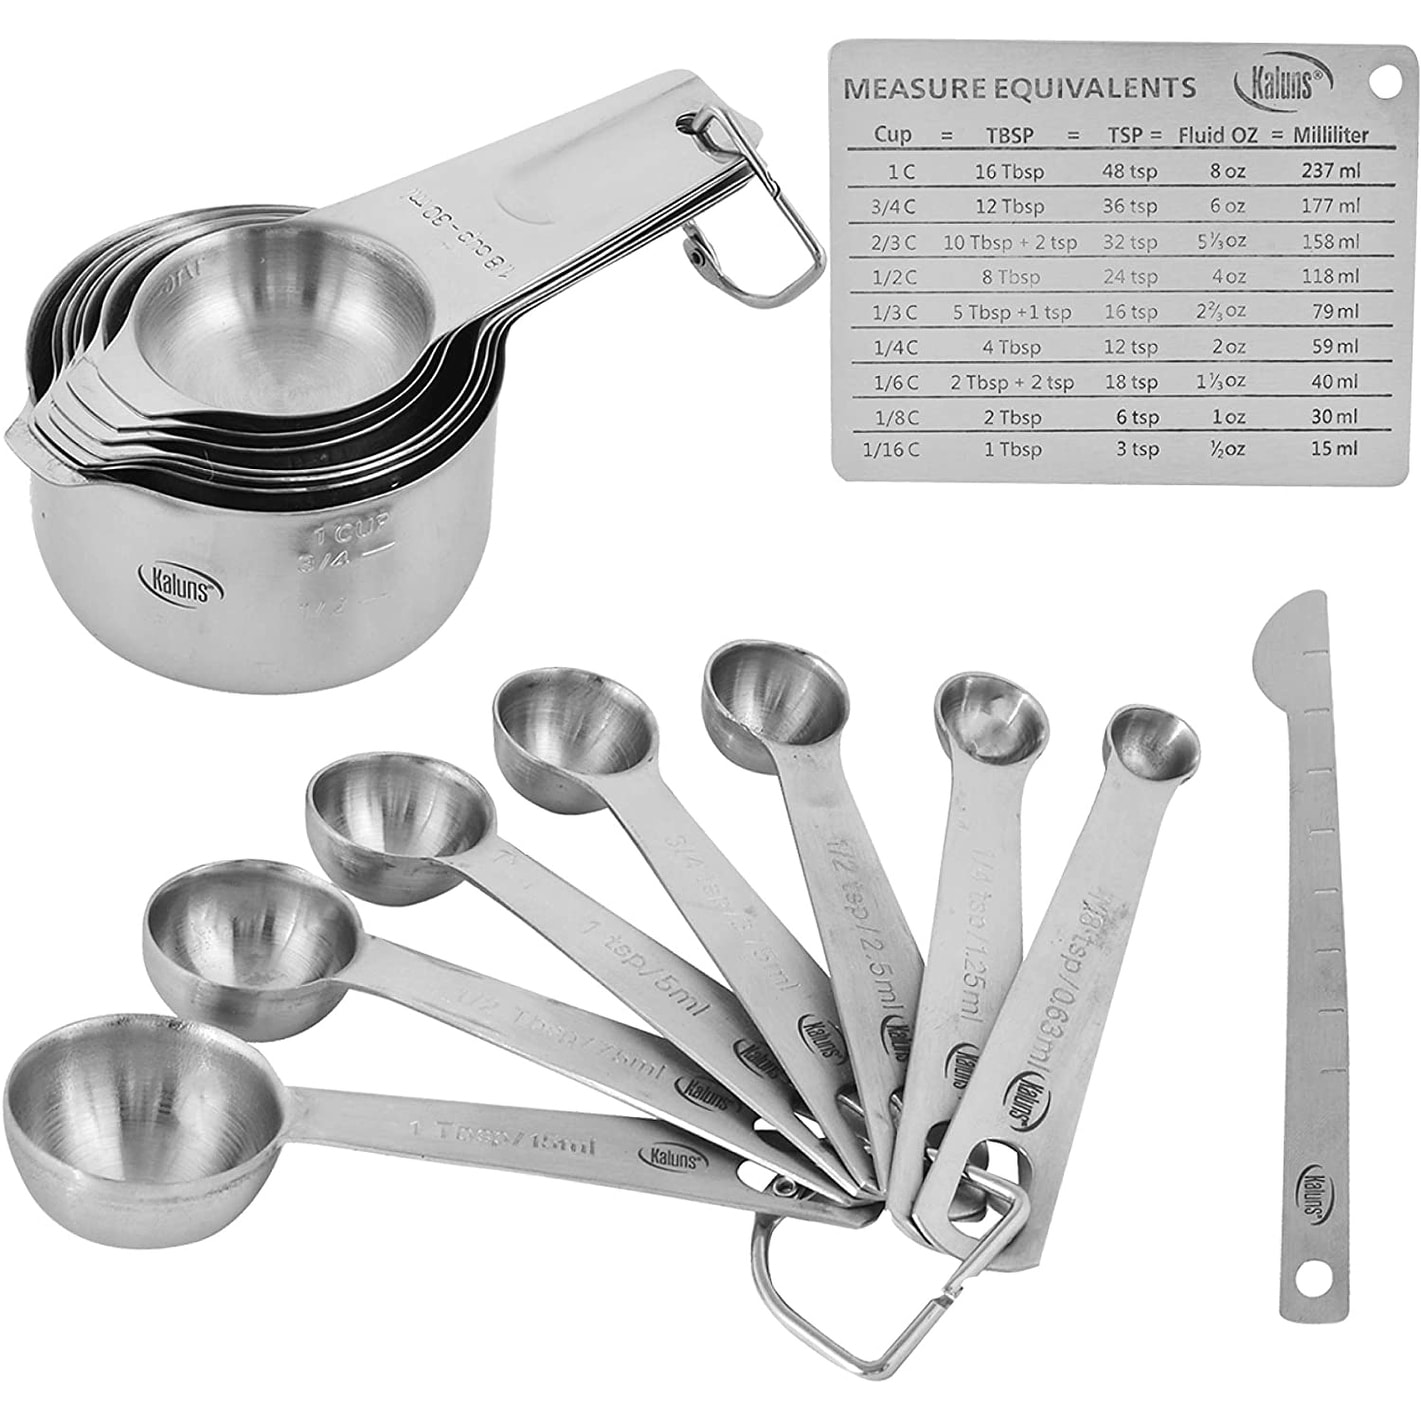 https://ak1.ostkcdn.com/images/products/is/images/direct/d33b147120d343dfb6e57400f59854a8a290dfc6/Measuring-Cups-and-Spoons%2C-16-Piece-Stainless-Steel.jpg